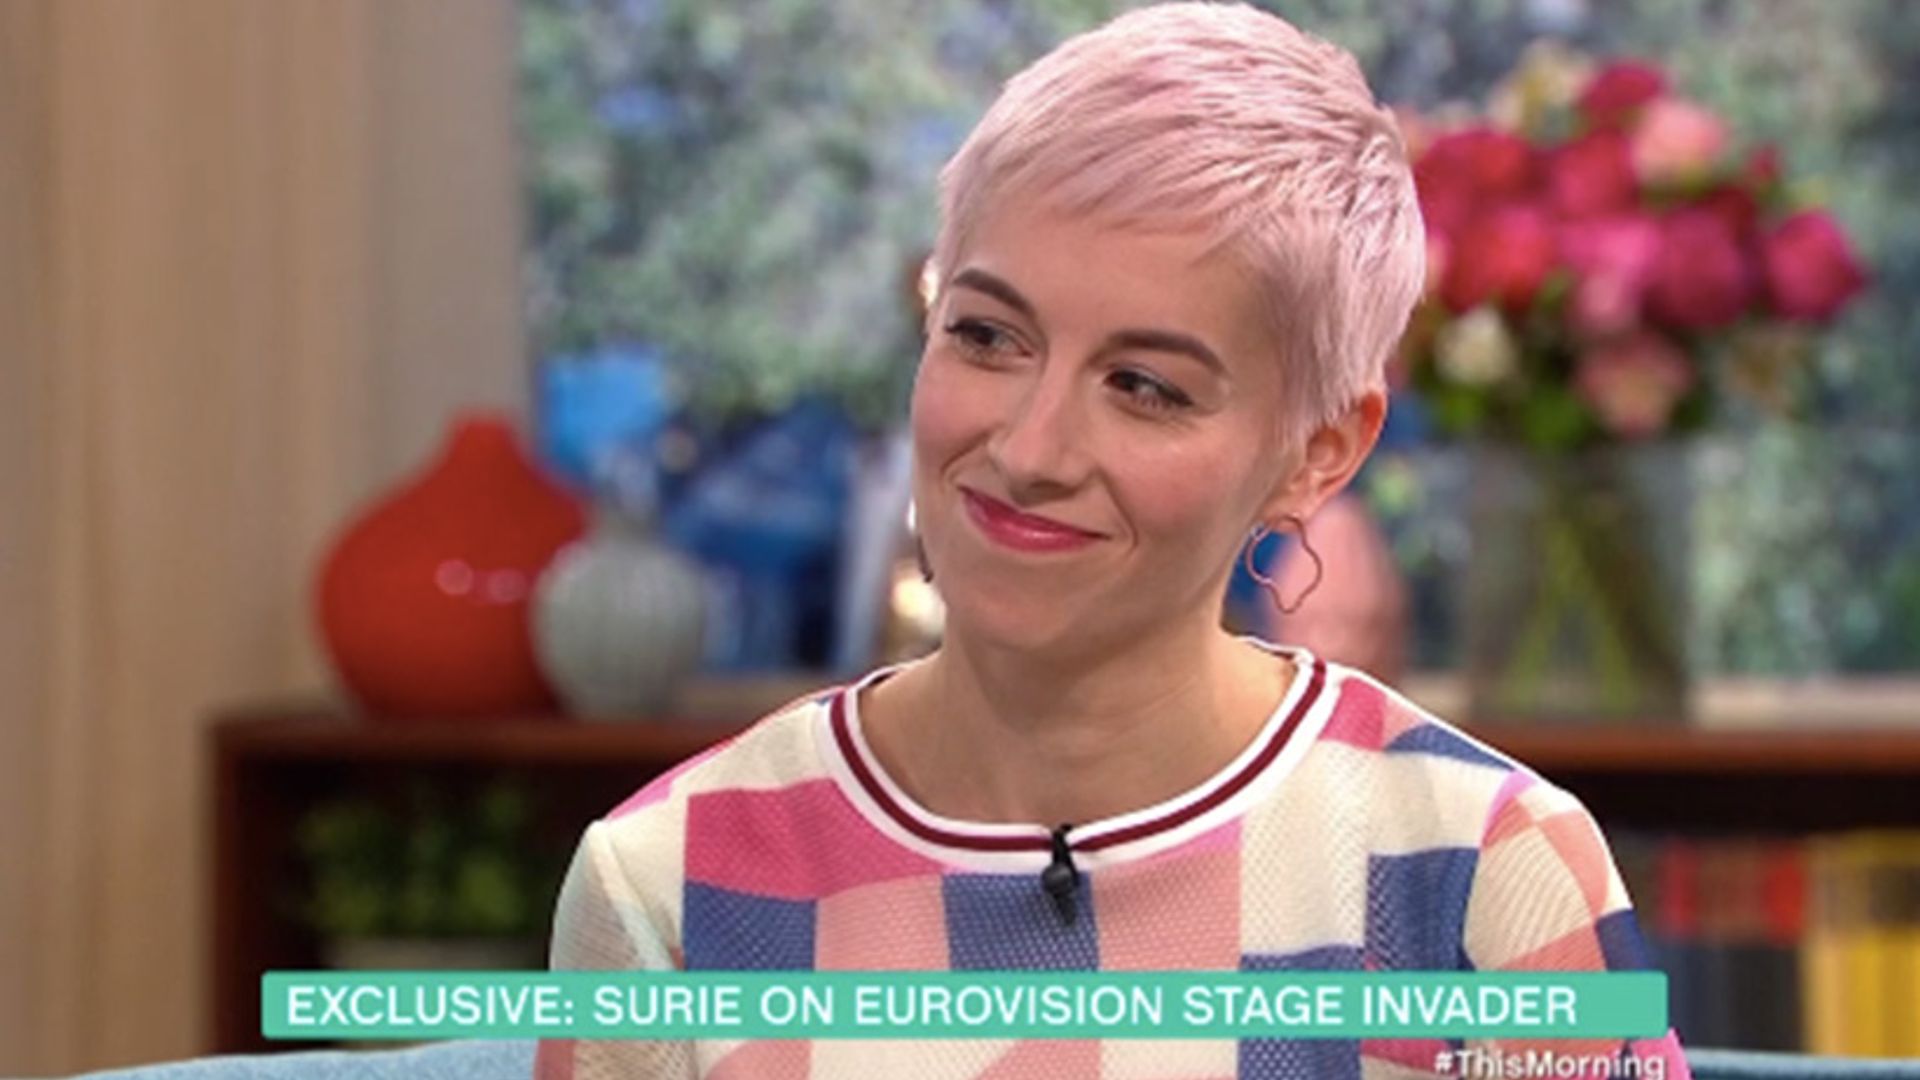 Eurovision star SuRie left with bruises after encounter with stage invader